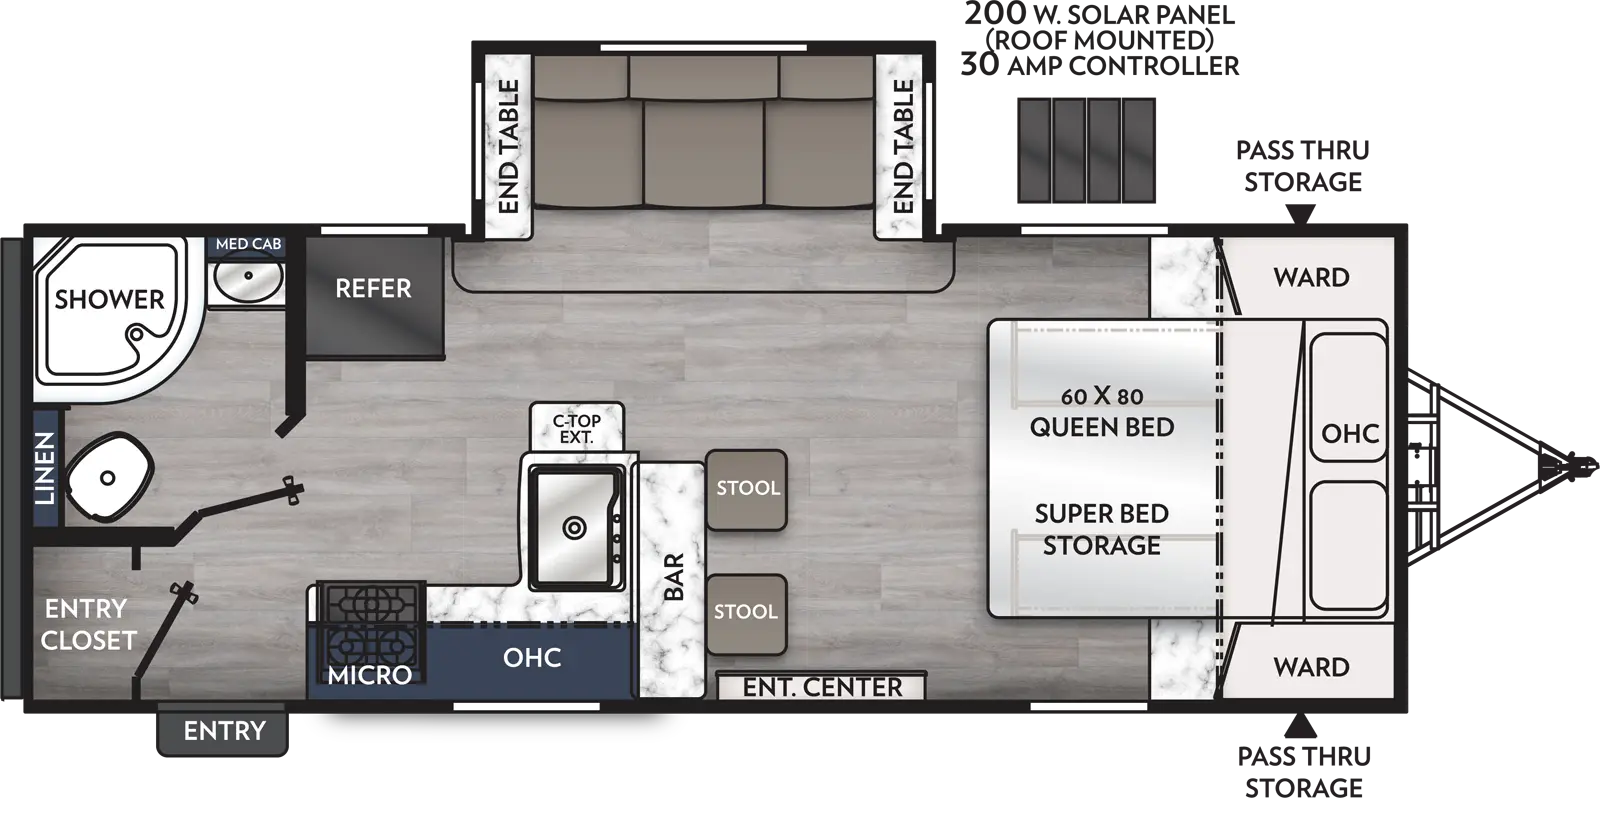 The 211RBS has one slide out on the off-door side and one entry door on the door side. Interior layout from front to back: front bedroom with foot facing queen bed, super storage under bed, overhead cabinet, and wardrobes on either side of the bed; kitchen living dining area with off-door side slide out containing sofa with end tables on either side; entertainment center on door side; door side kitchen containing two bar stools, countertop extension, sink, overhead cabinet, cook top stove, and microwave overhead; refrigerator on off-door side; rear off-door side bathroom; and rear door side entry closet.